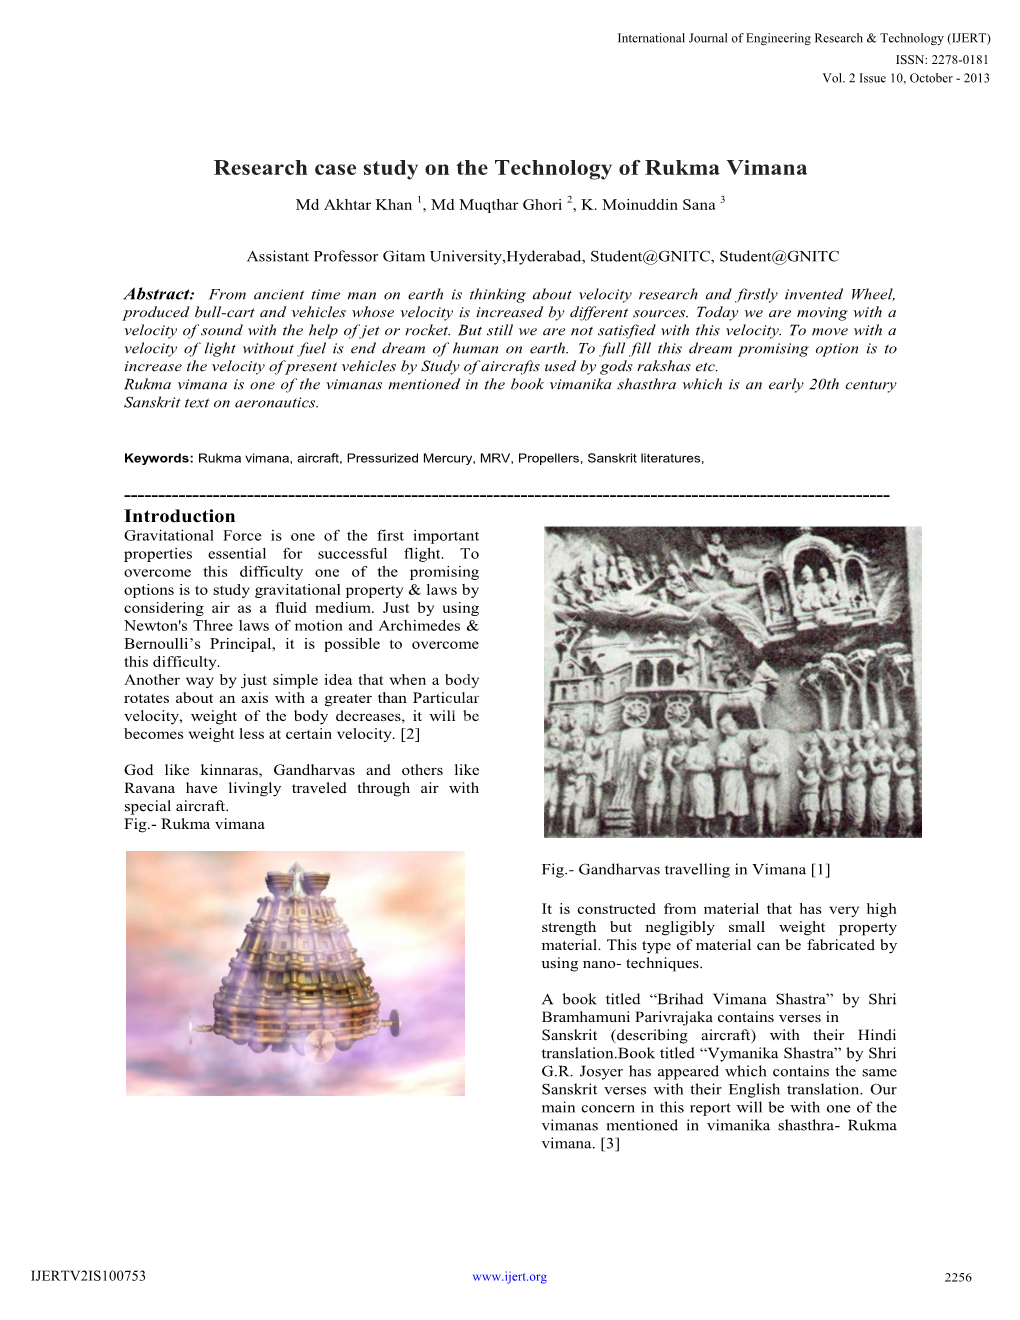 Research Case Study on the Technology of Rukma Vimana